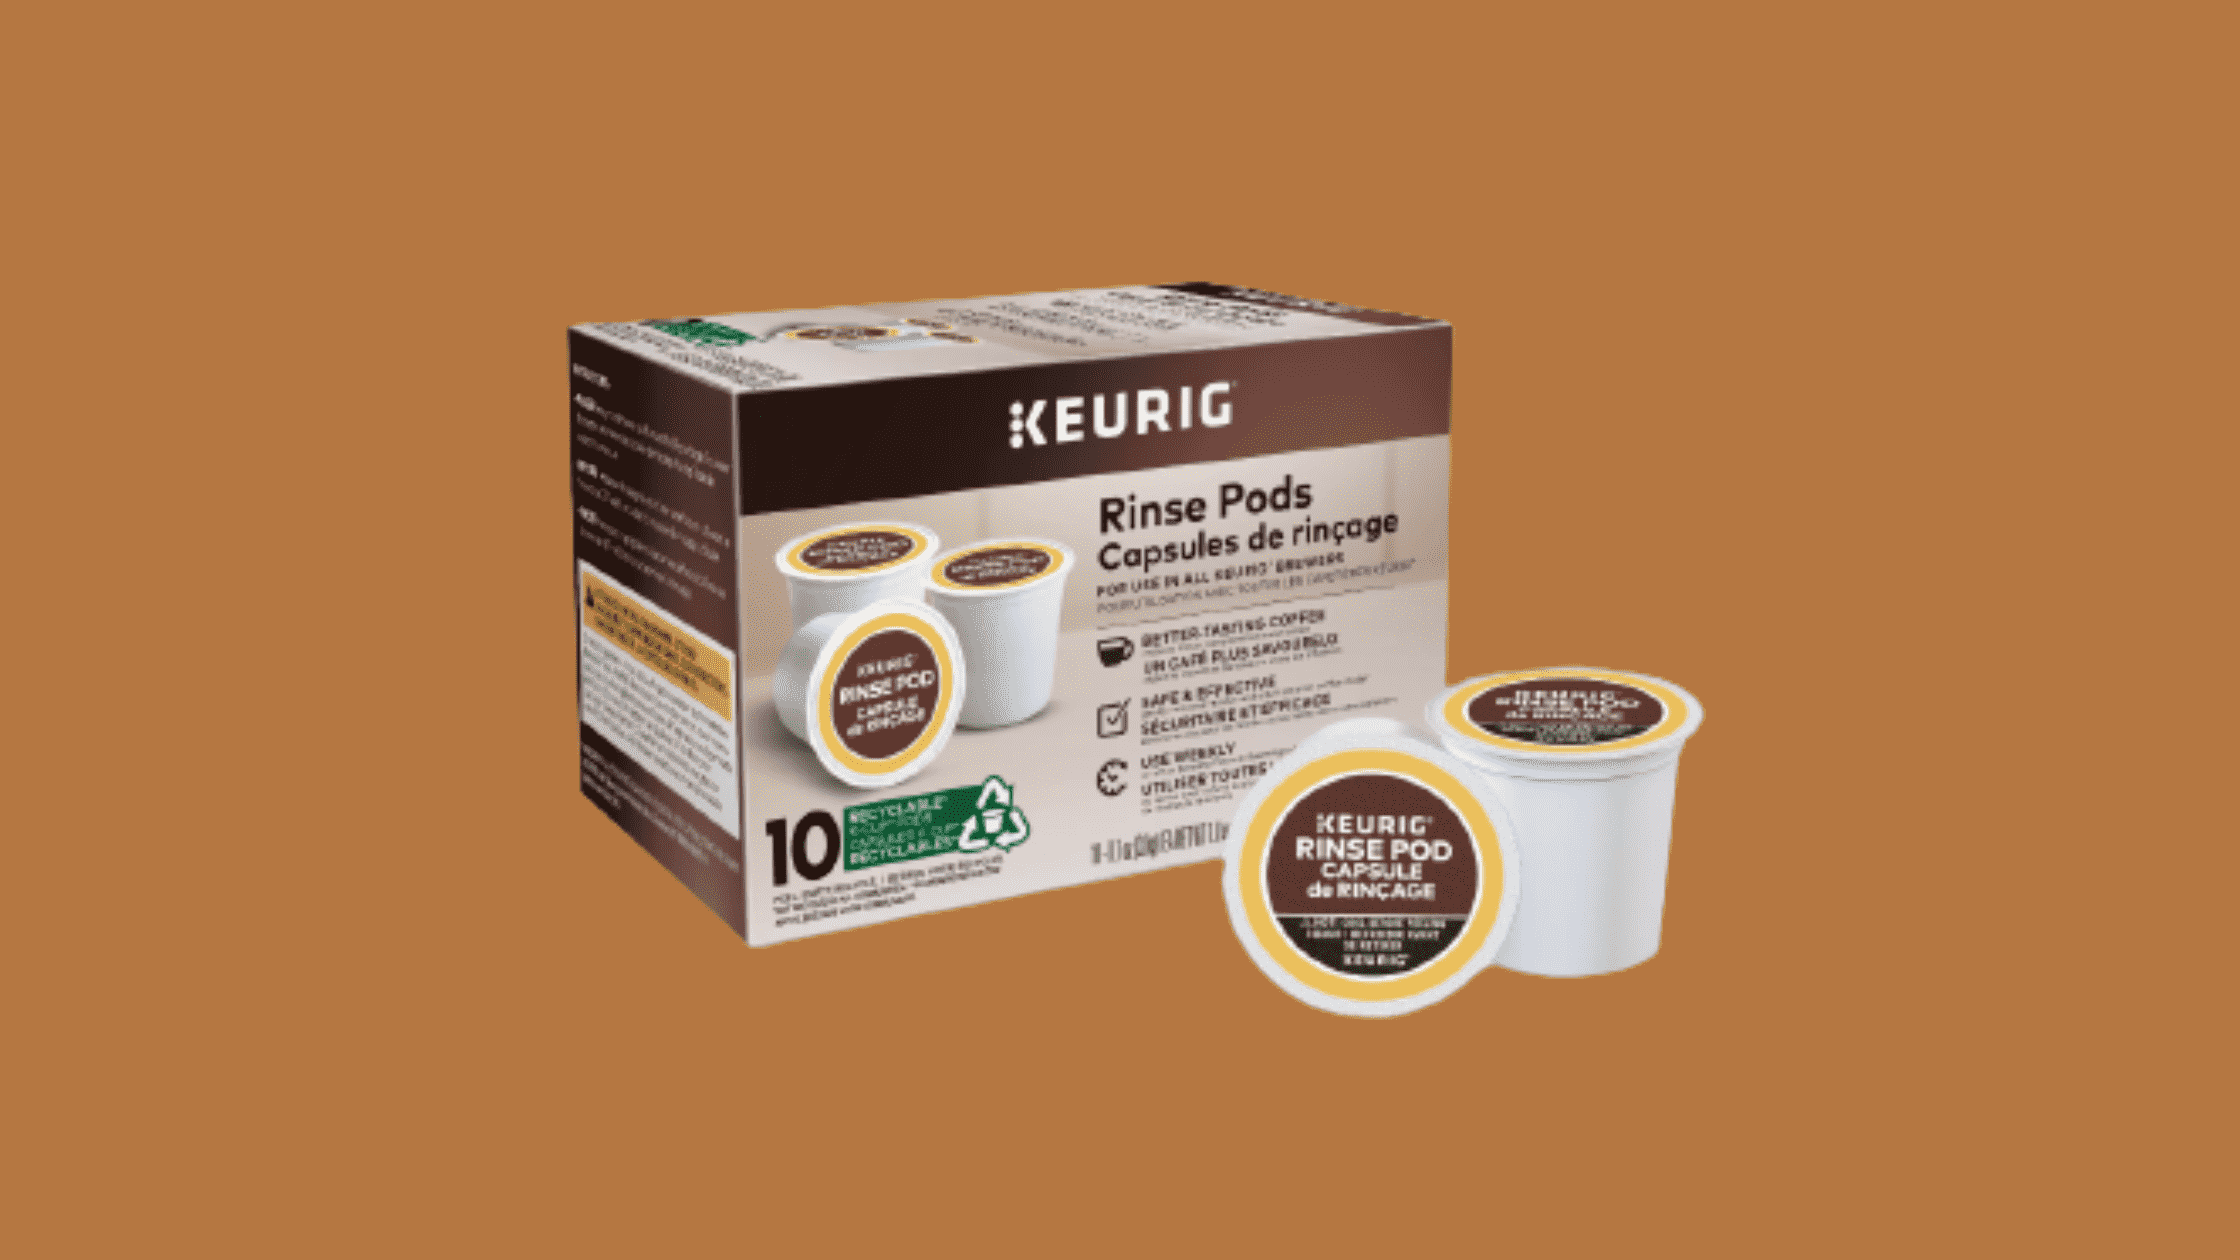 How To Use Keurig Rinse Pods? Follow These Easy Steps